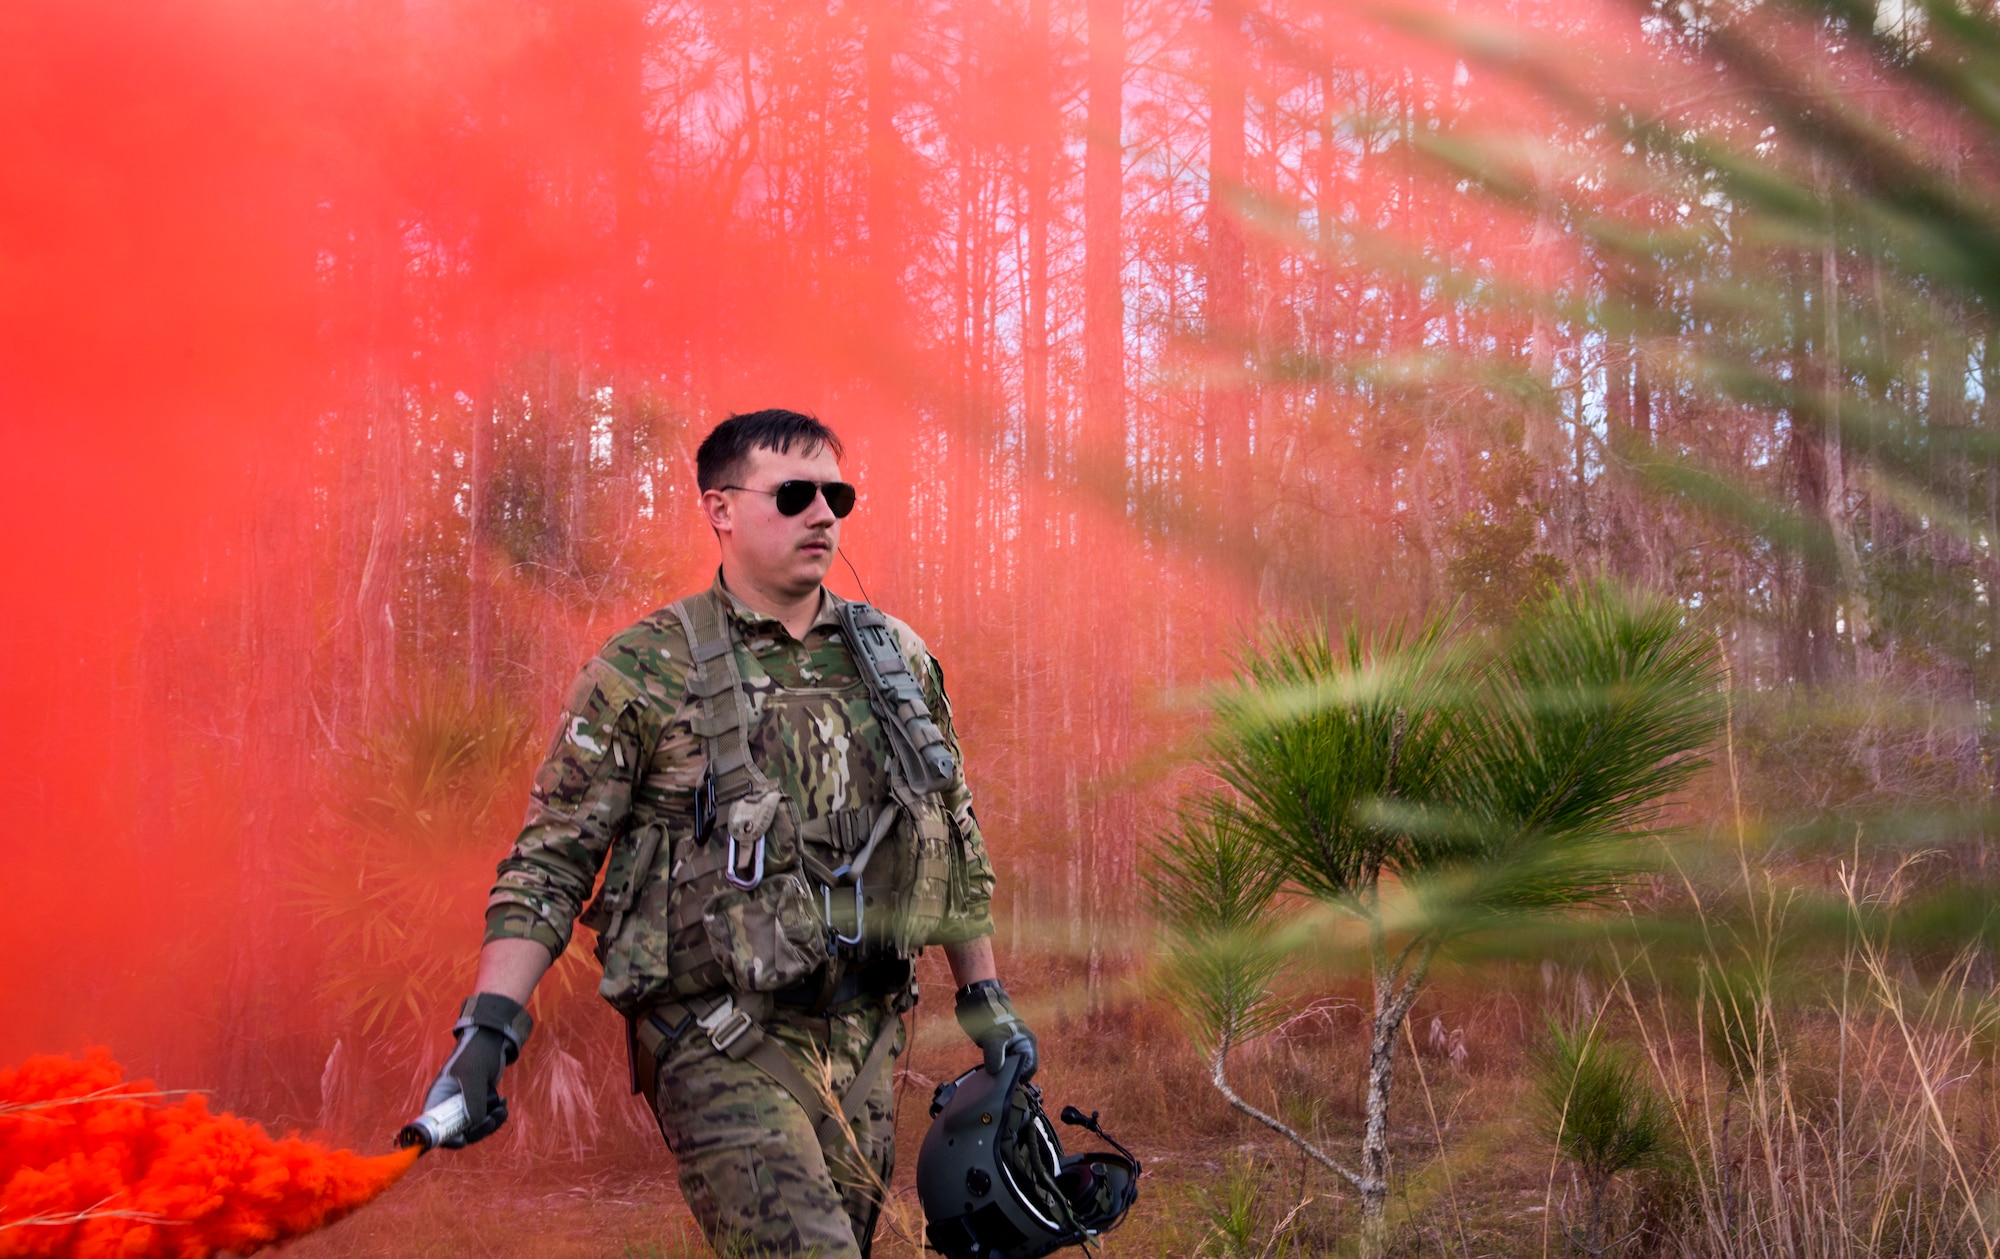 U.S. Army 1st Lt. Anthony Minissale, a 2-10 Assault Helicopter Battalion UH-60 Black Hawk pilot from Fort Drum, New York, uses a signal flare during an Emerald Warrior 2019 search and rescue training exercise at Avon Park, Florida, Jan. 22, 2019.